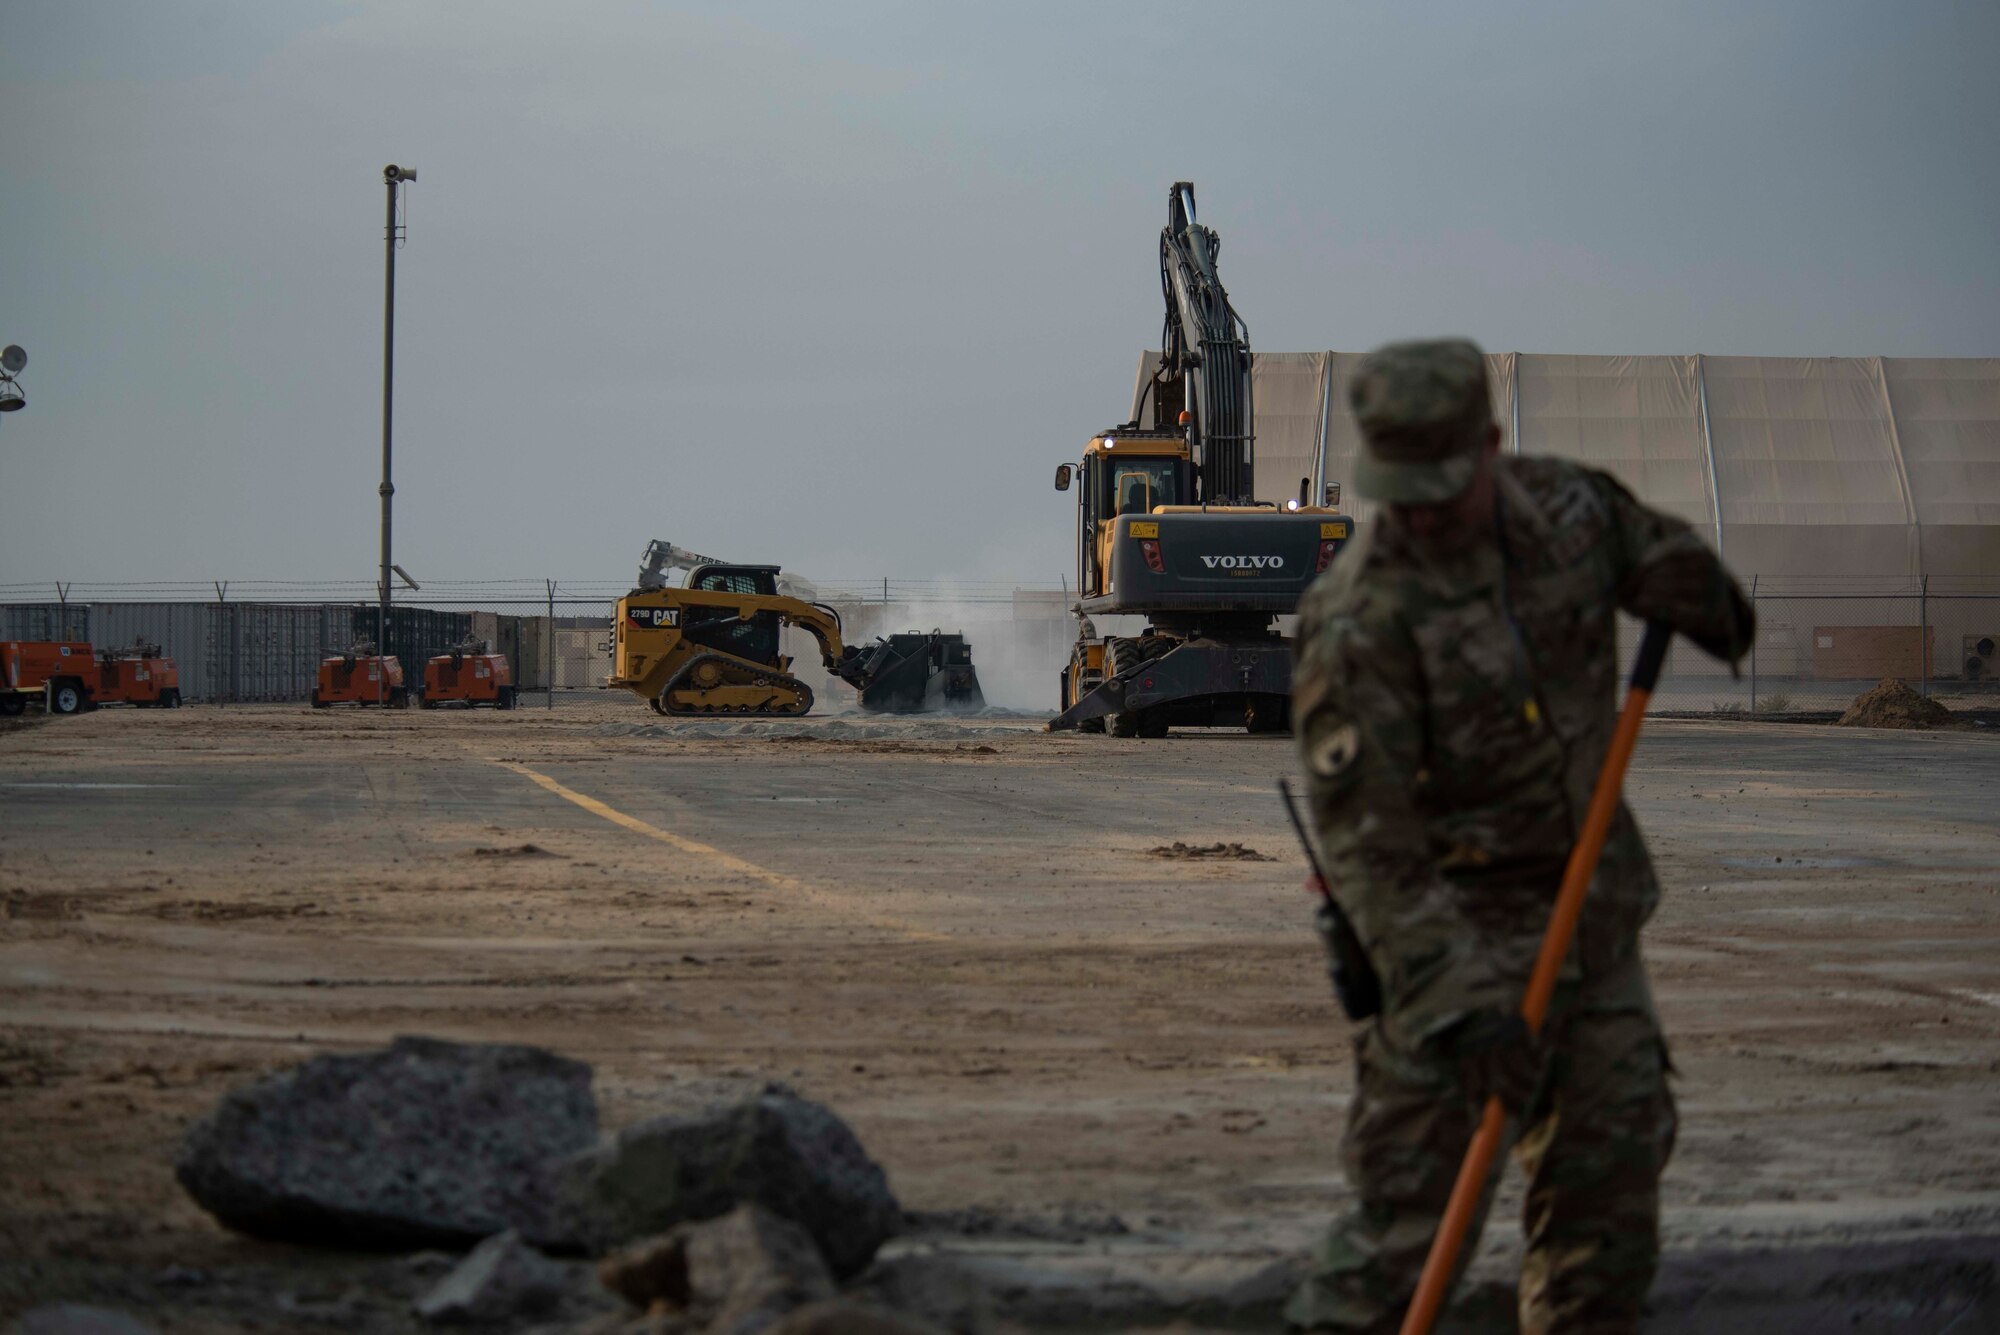 A U.S. Air Force Airman from the 386th Expeditionary Civil Engineer Squadron removes debris from a crater during a Rapid Airfield Damage Recovery training exercise at Ali Al Salem Air Base, Kuwait, Nov. 16, 2020. The RADR process utilizes different teams to do specific tasks, efficiently repairing a damaged runway in a short amount of time. (U.S. Air Force photo by Staff Sgt. Kenneth Boyton)